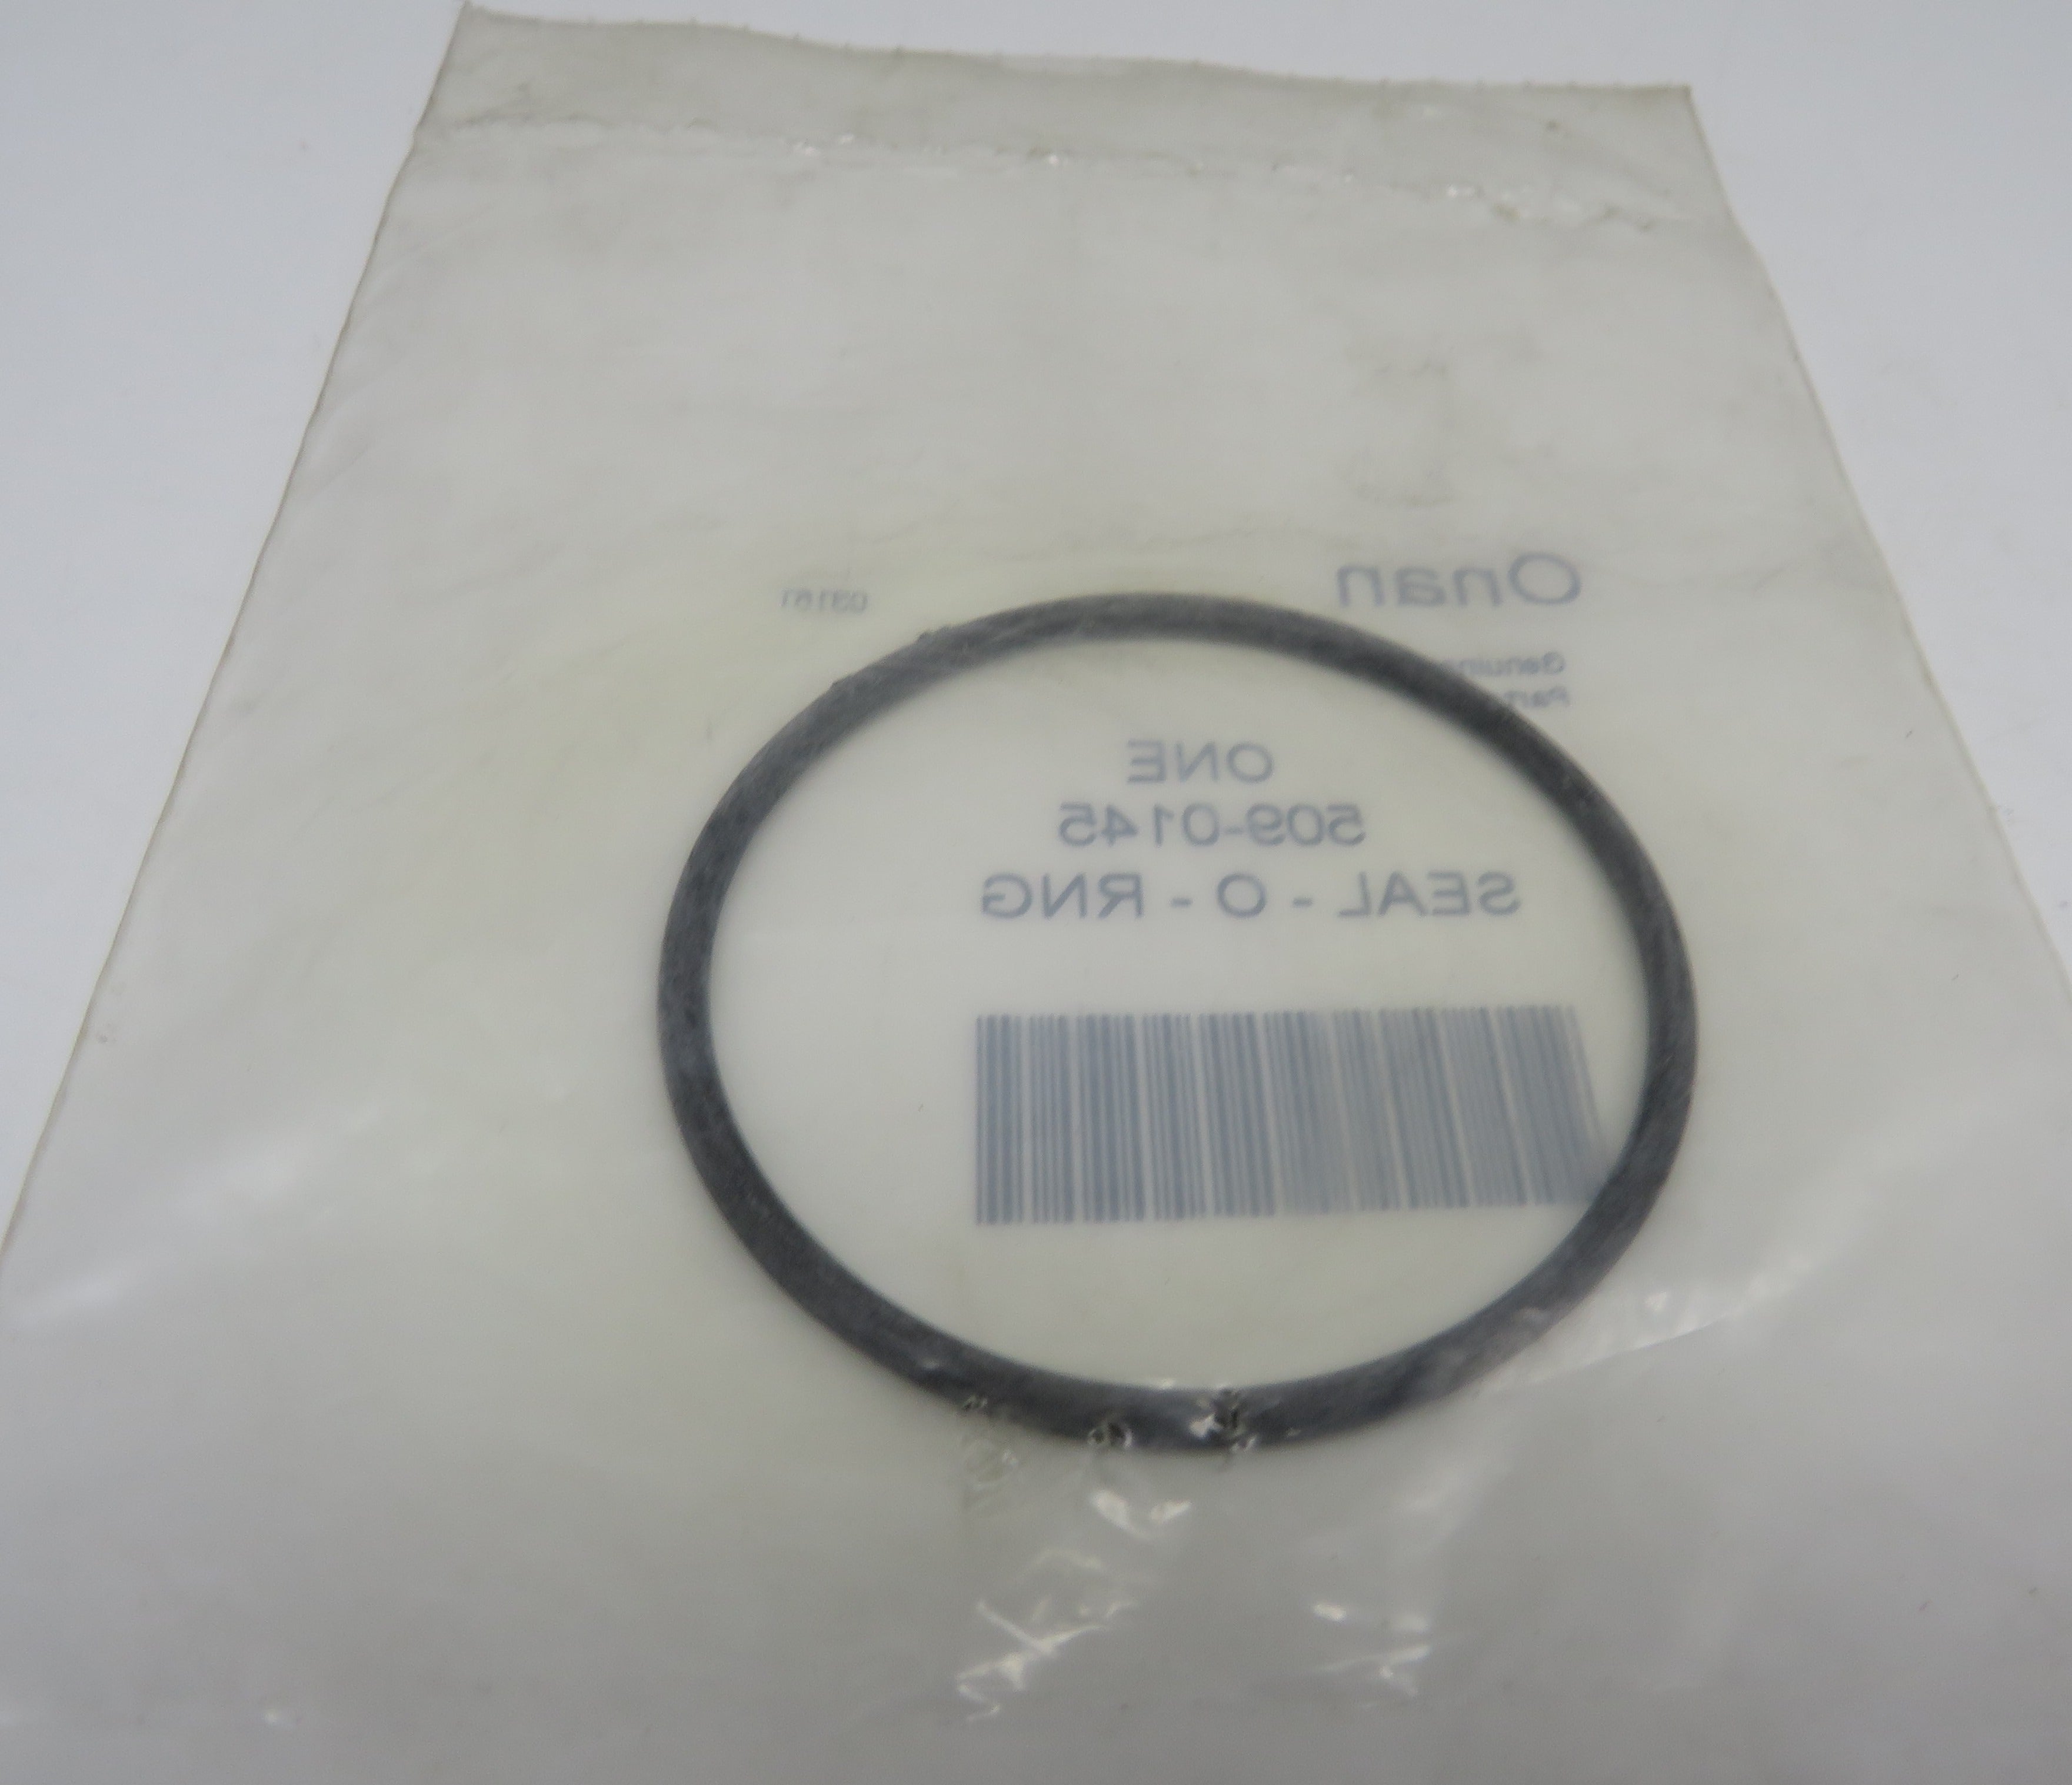 509-0145 Onan O-ring Seal For Onan Engine P216G OL16 LX720, P218G OL18 LX770 & P220G OL20 LX790 For Fuel System Gasoline 3/21/2024 THIS PART IS IN STOCK 3/21/2024